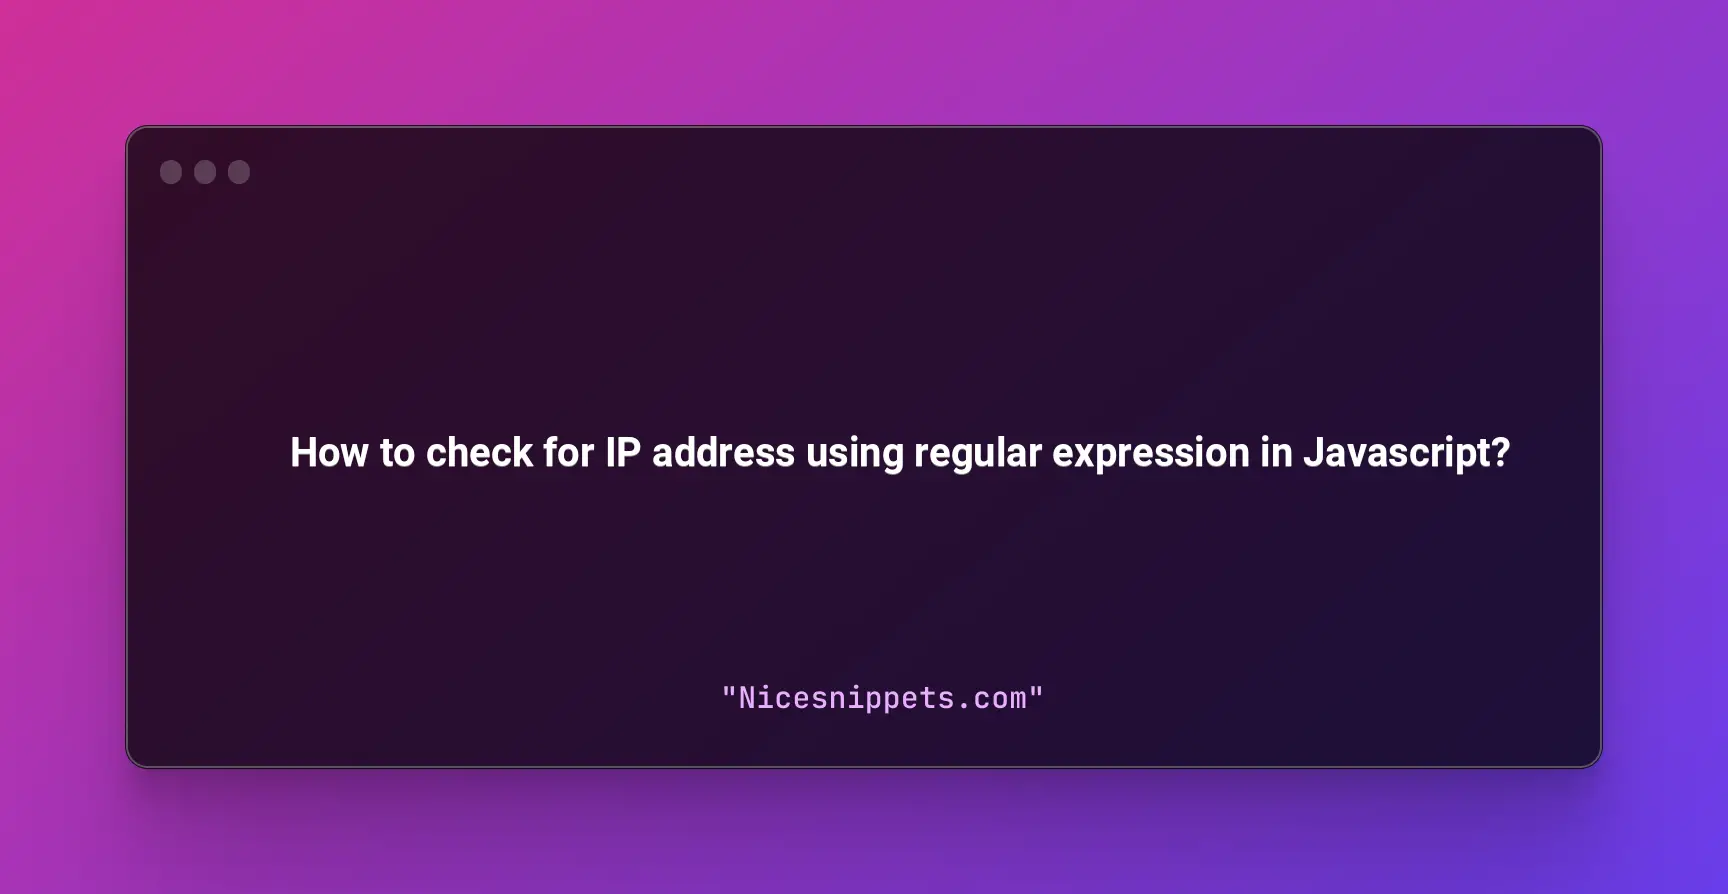 How to check for IP address using regular expression in Javascript?